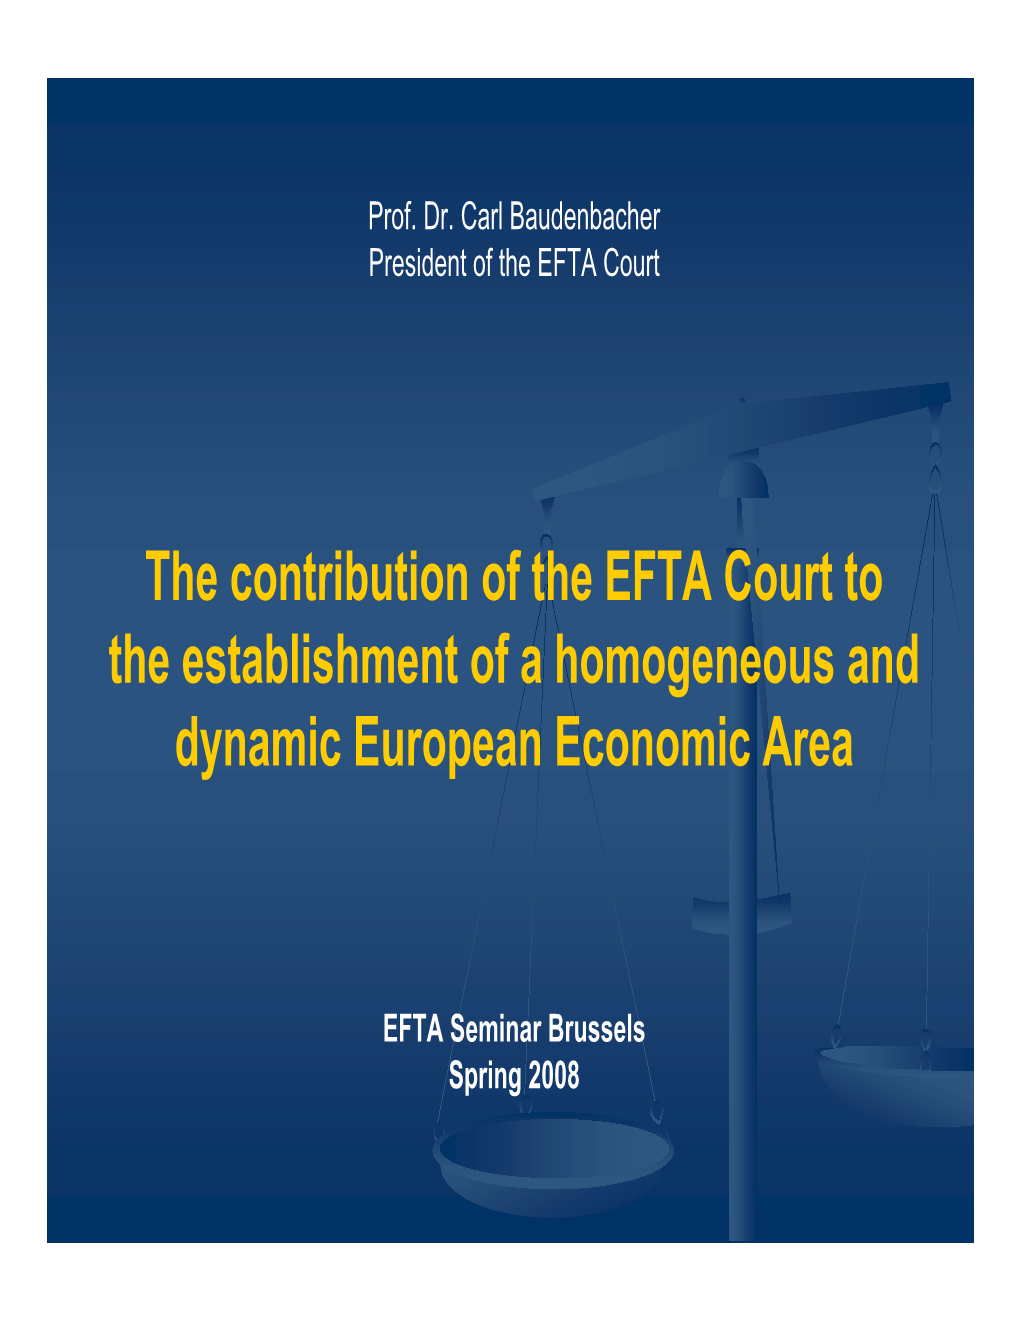 The Contribution of the EFTA Court to the Establishment of a Homogeneous and Dynamic European Economic Area